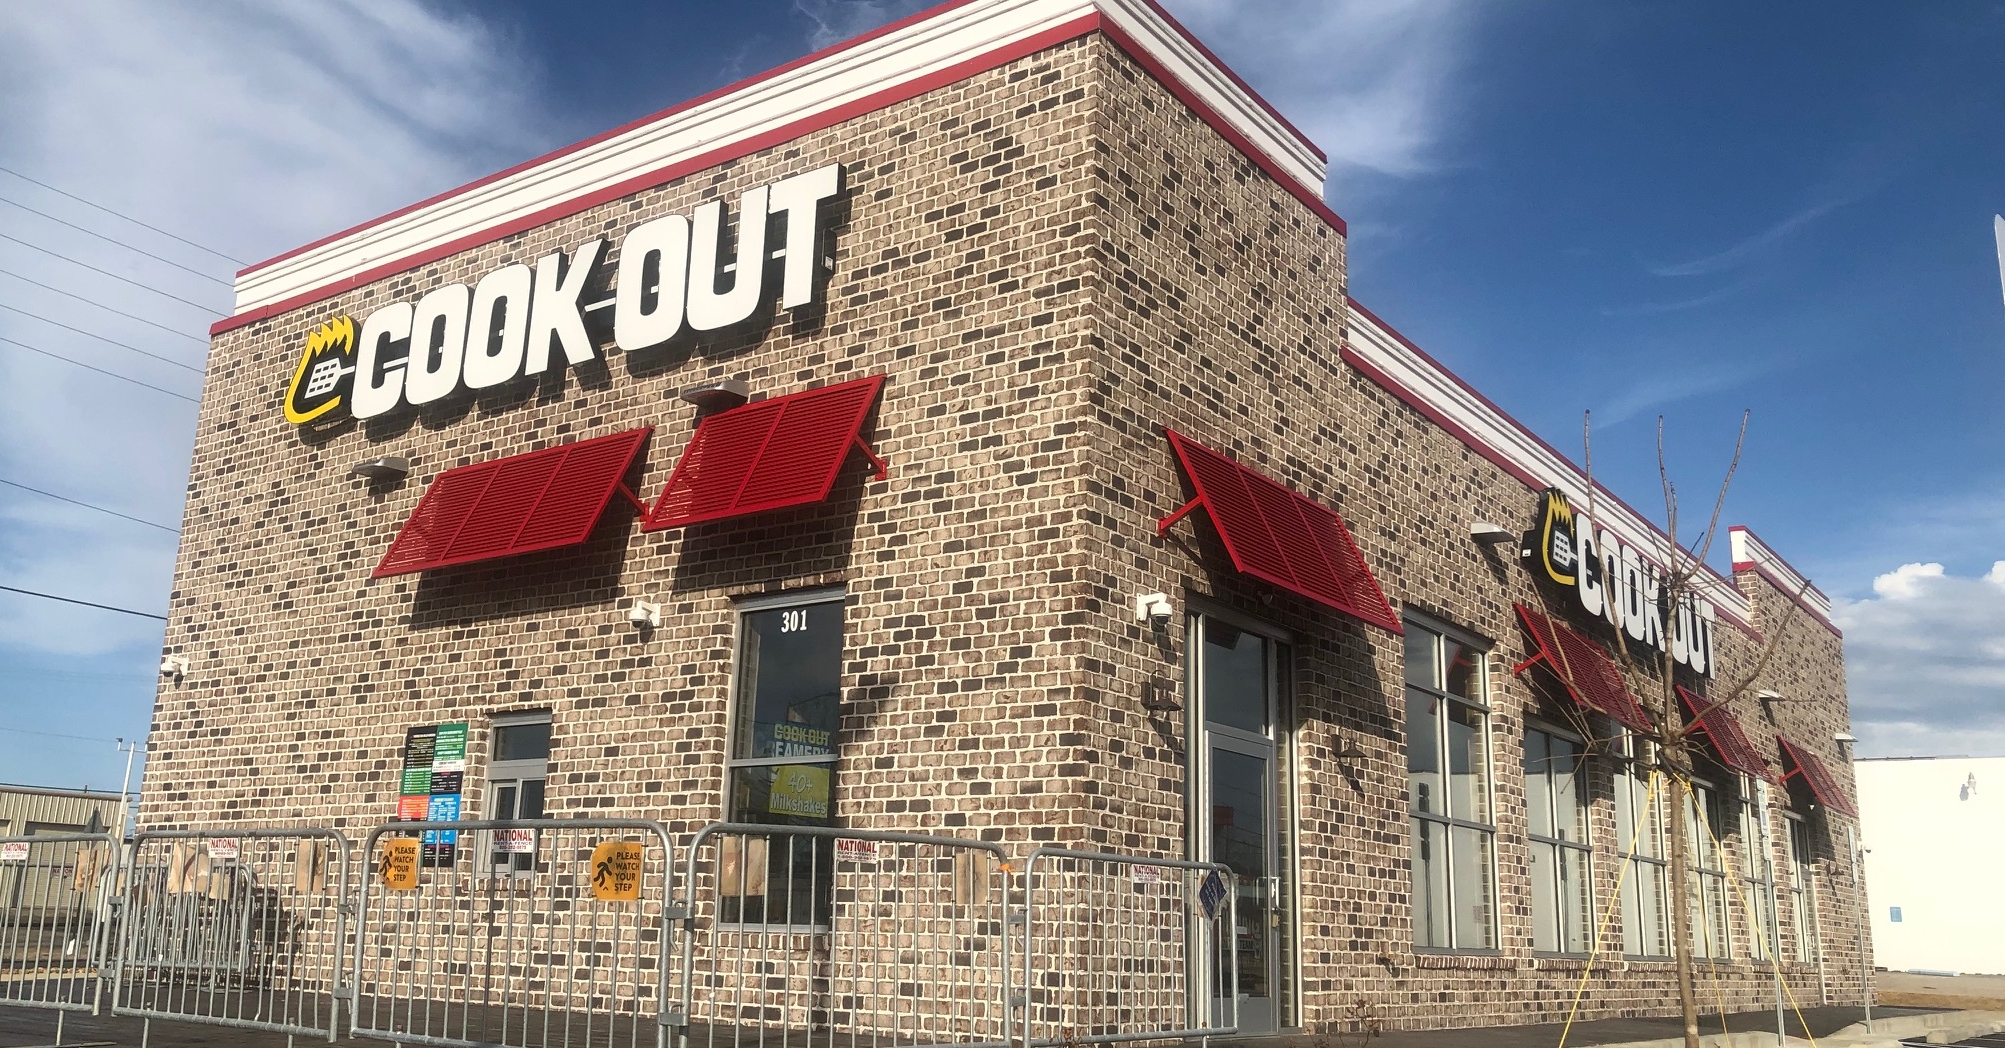 Cook Out Birmingham